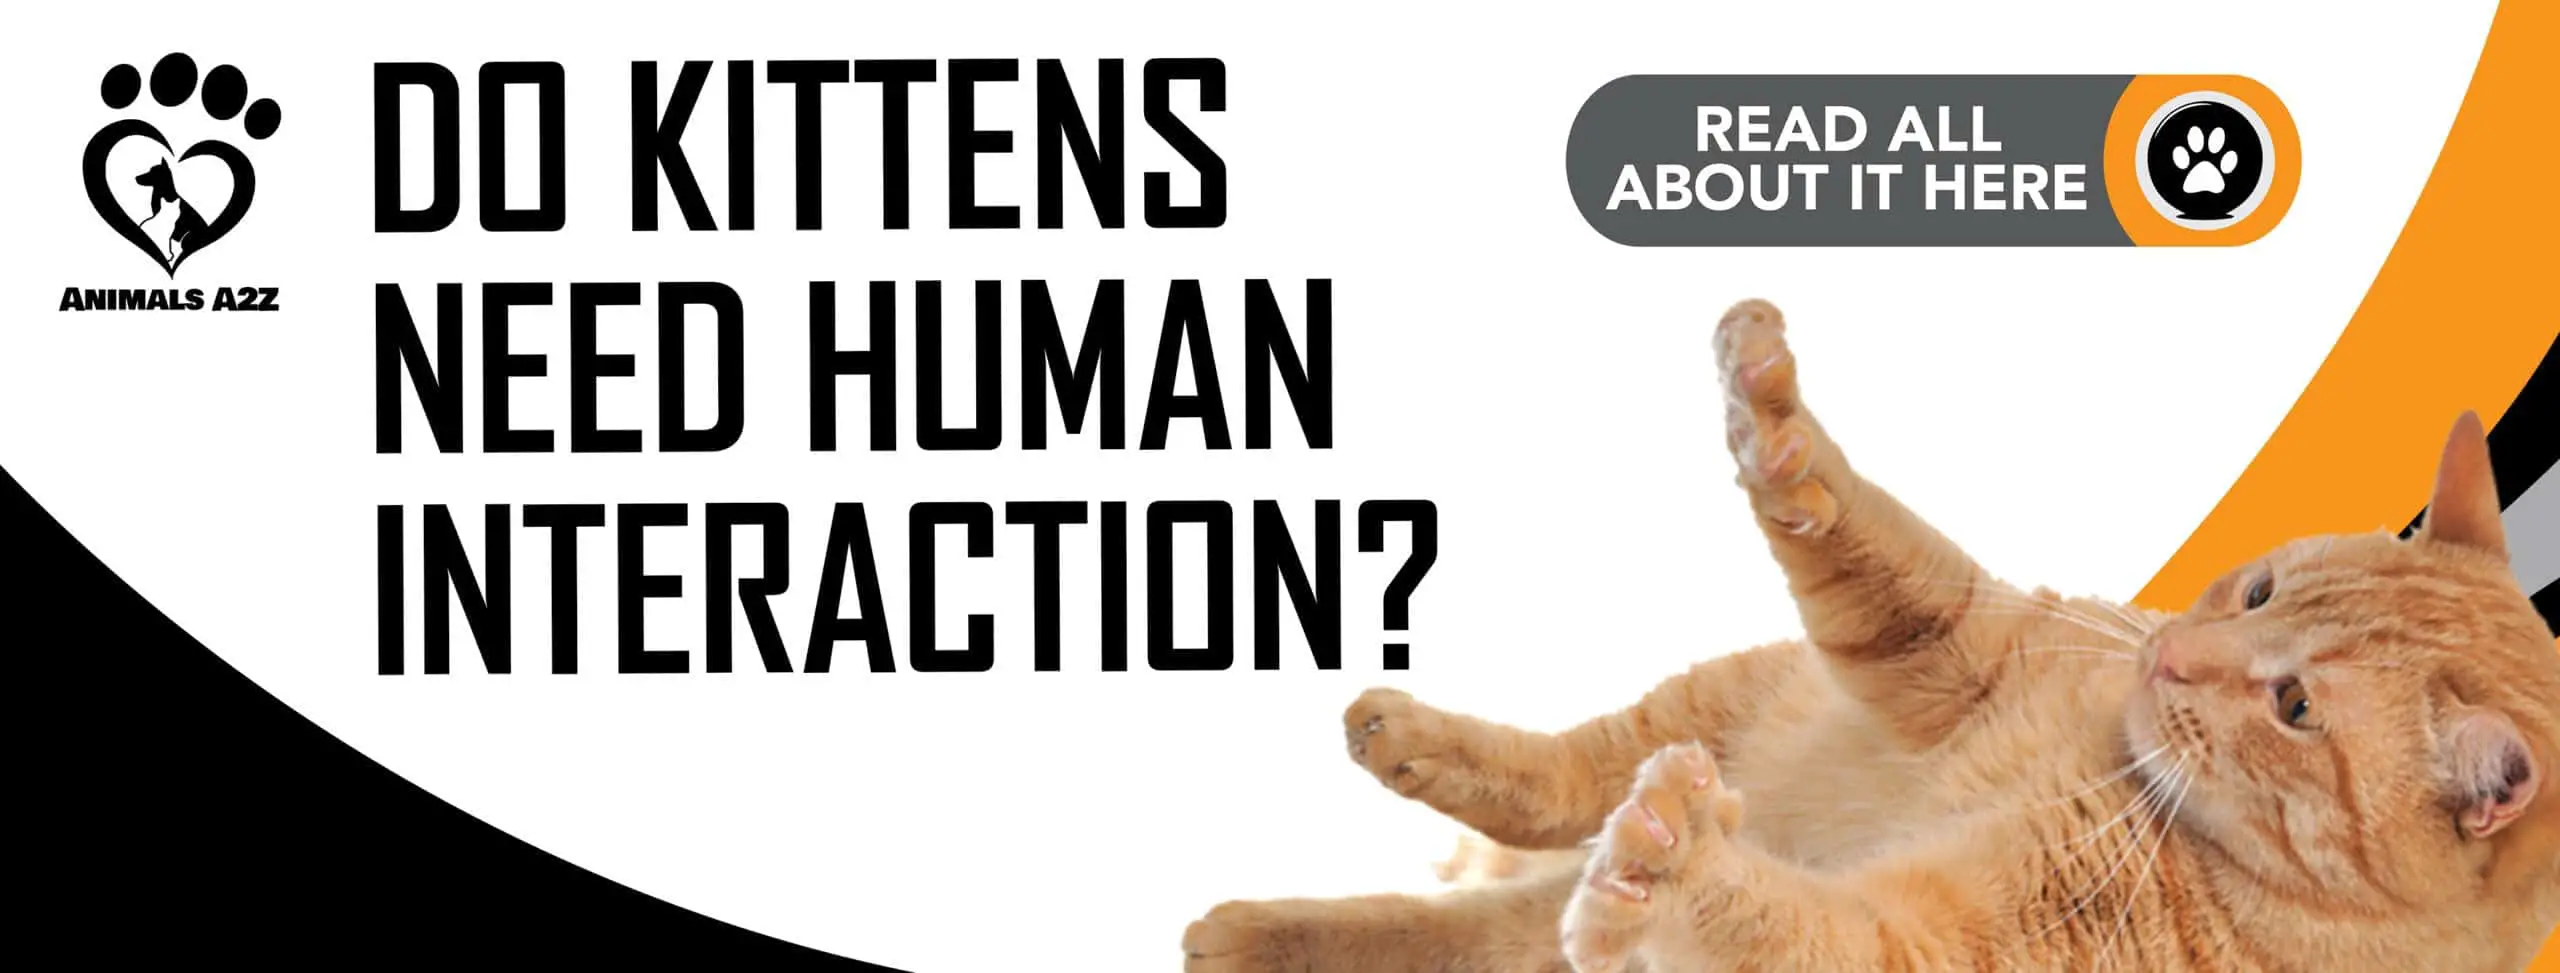 Les chatons ont-ils besoin d'interaction humaine ?